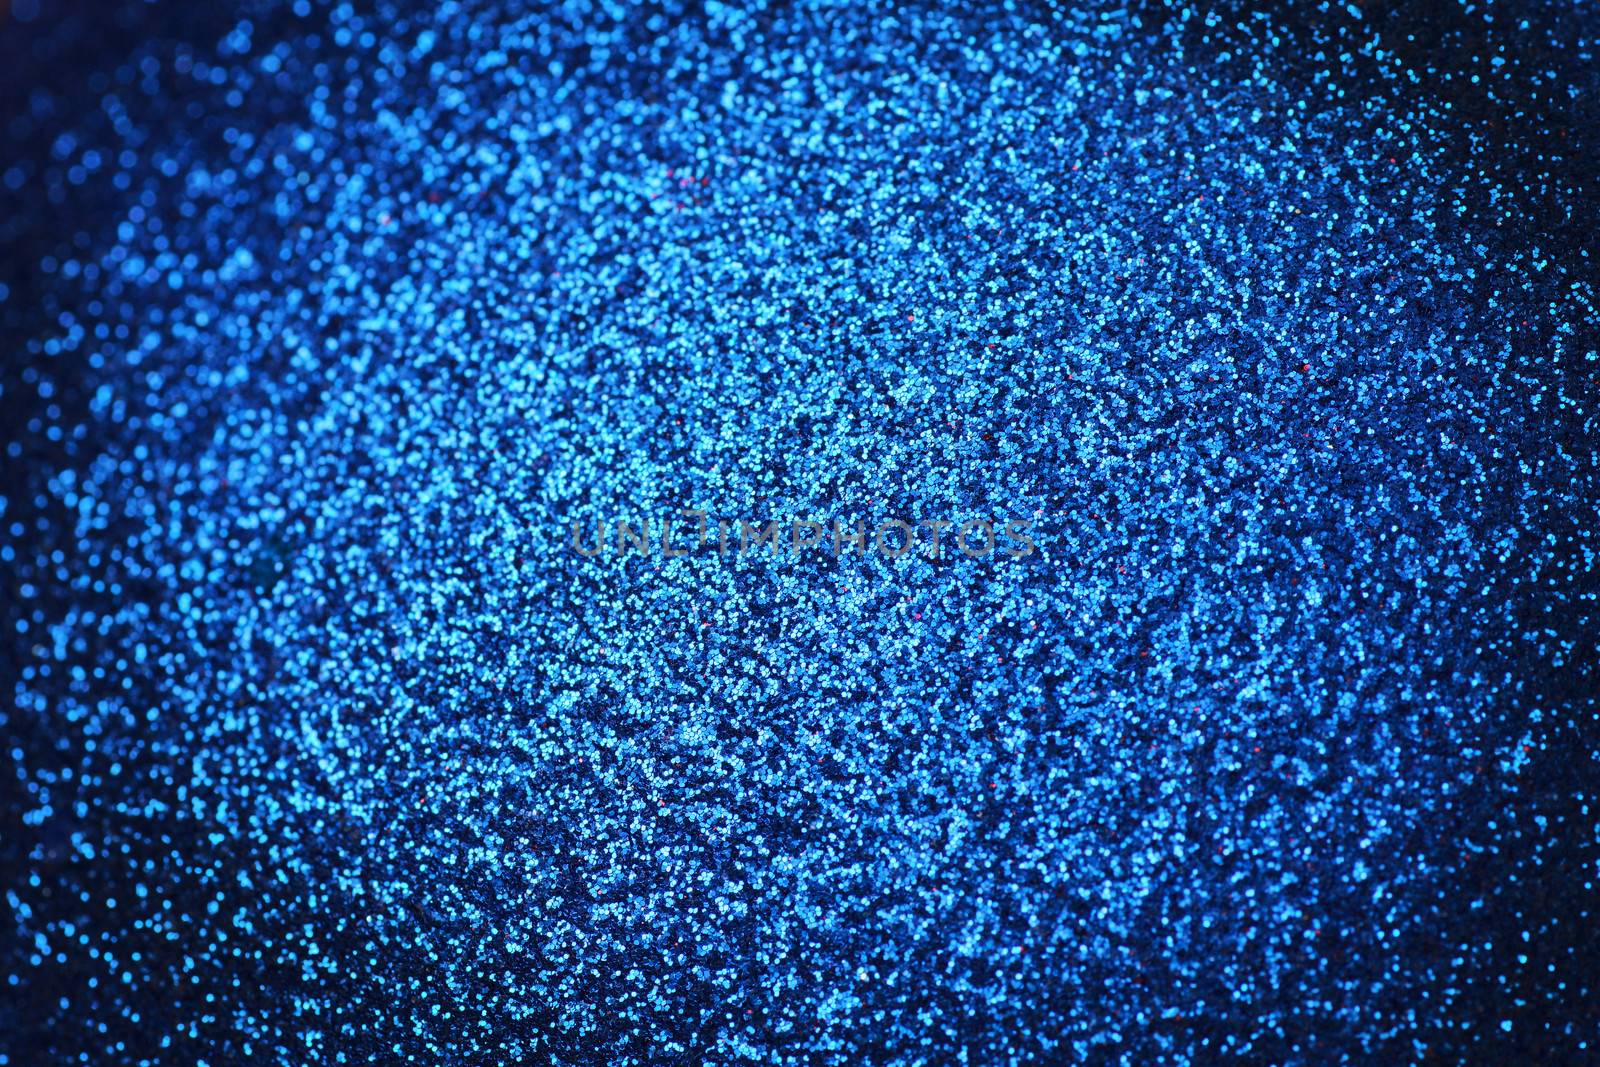 Blue metallic sparkling background with vignetting